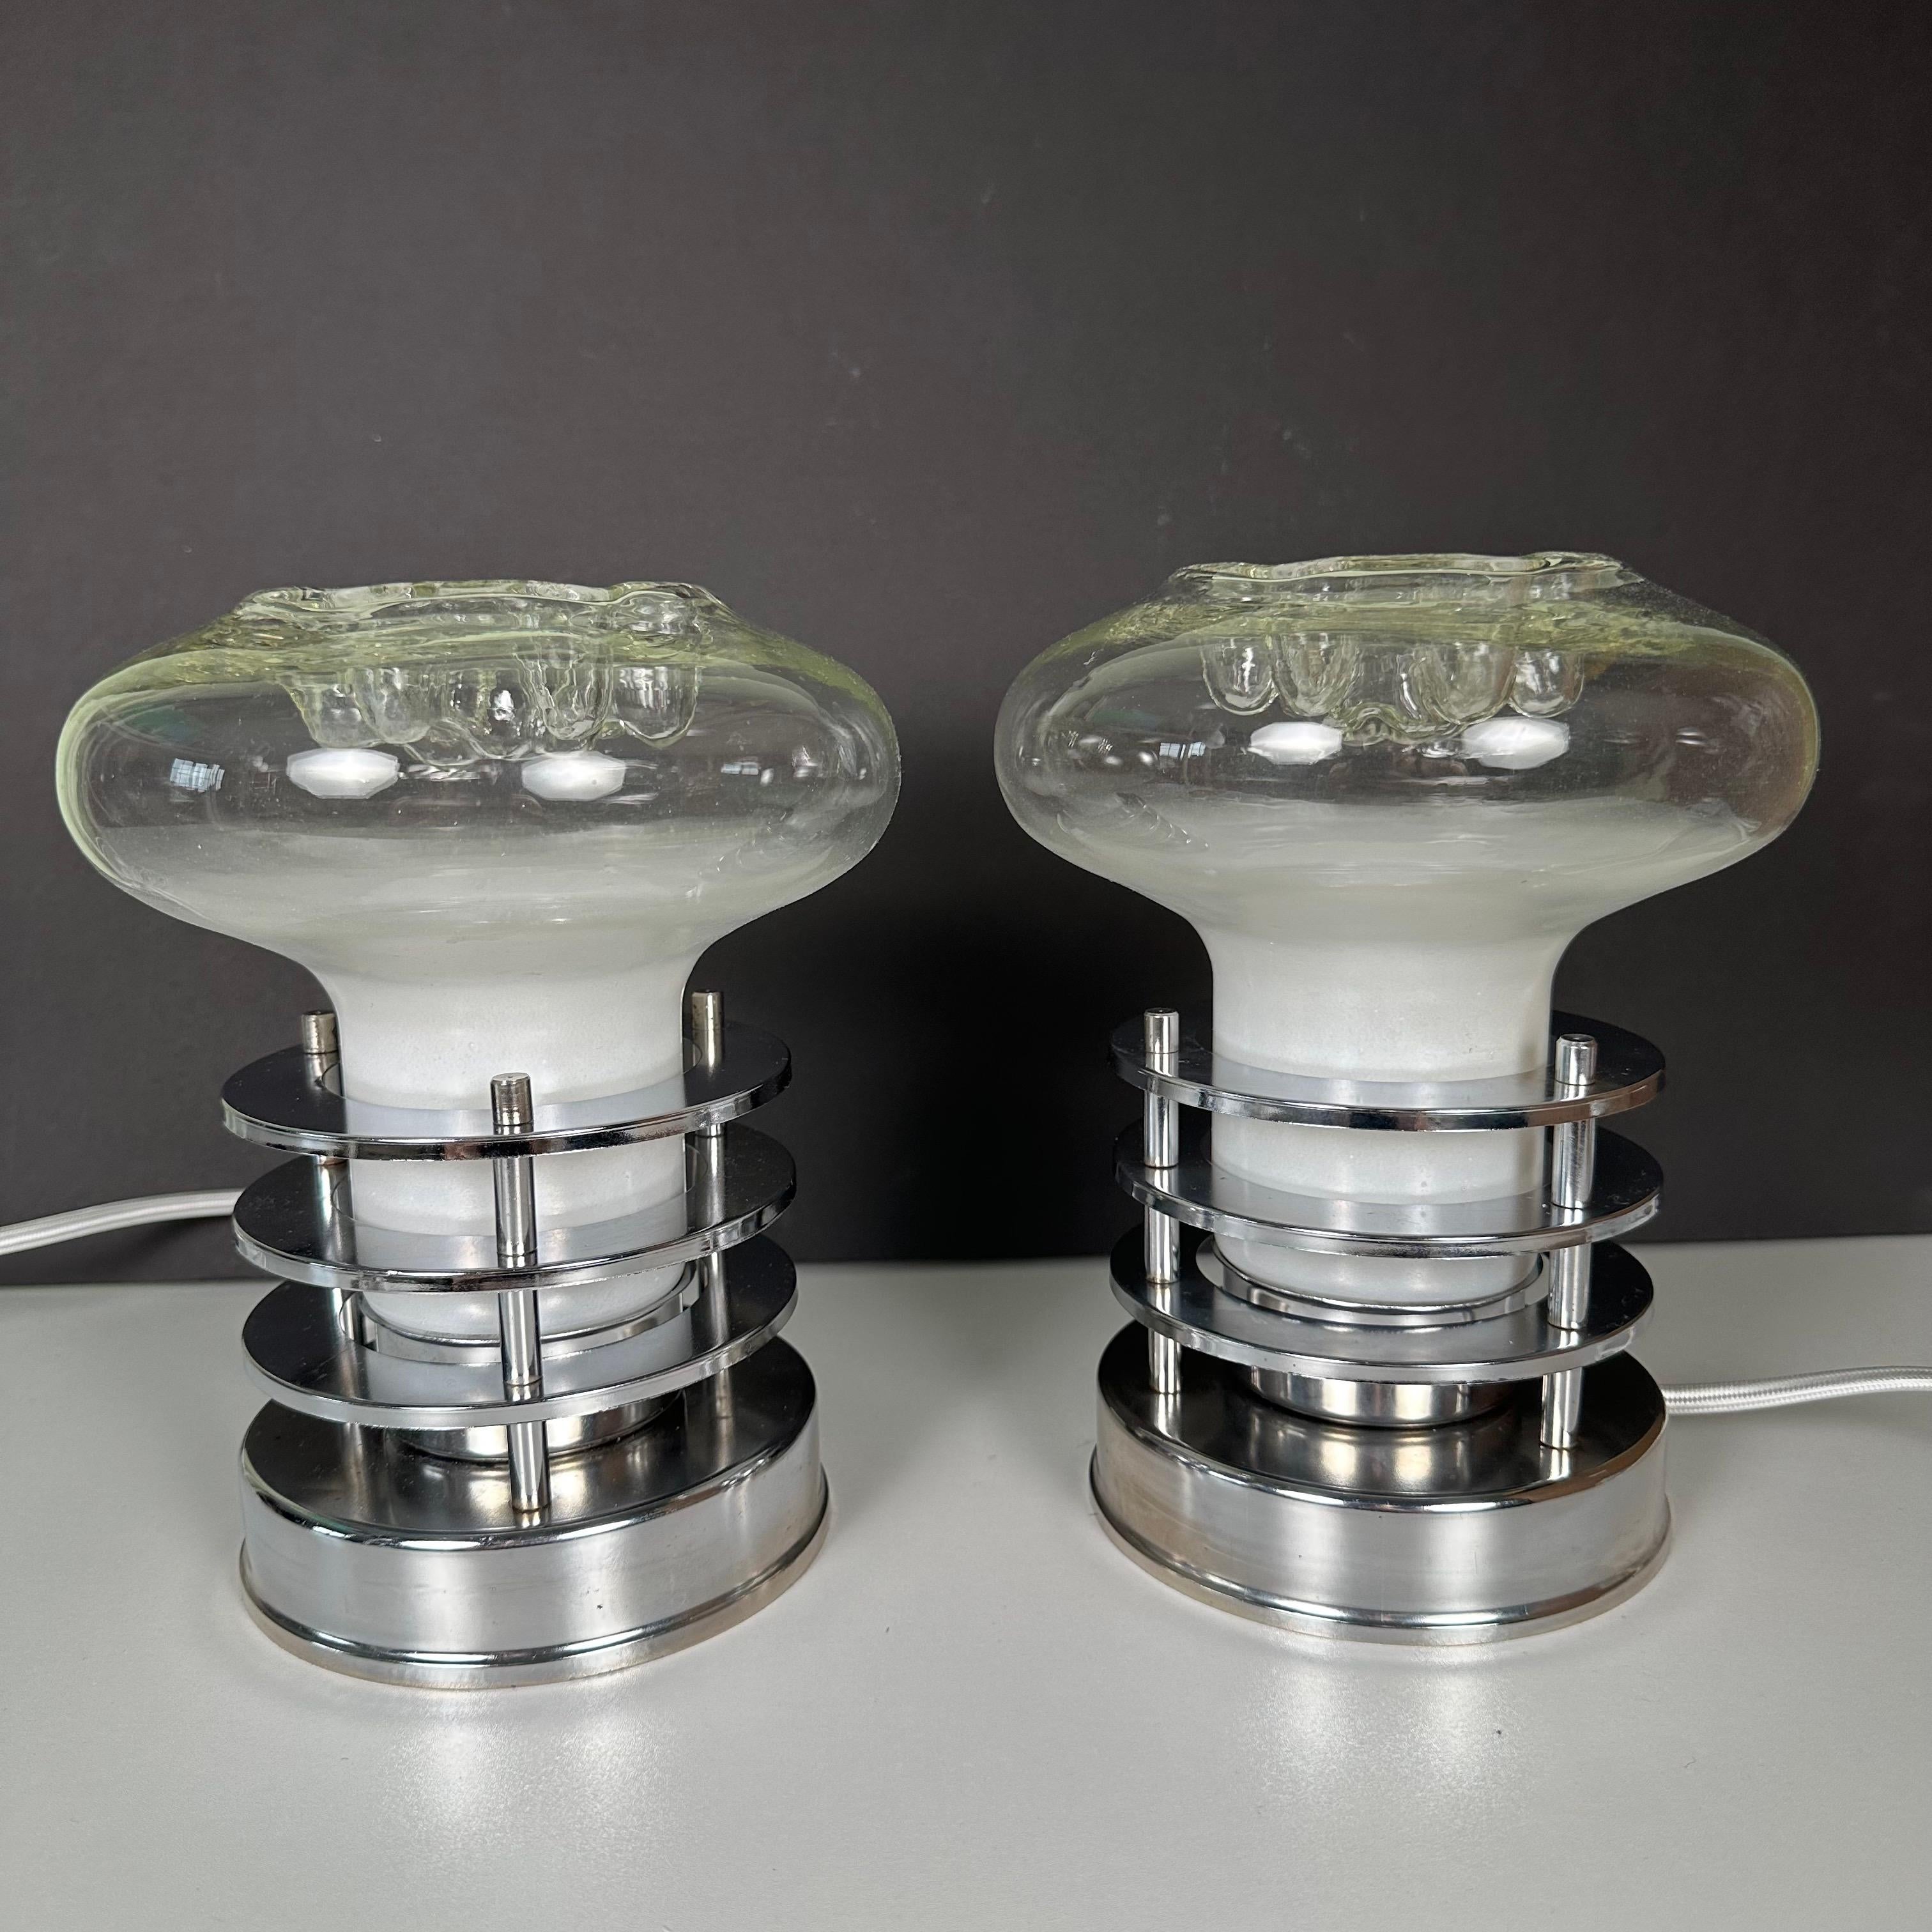 A pair of vintage Space Age table lamps in the style of Toni Zuccheri. A blown glass bulbous, organic mushroom form, indented on top, and with an applied frosted white finish, bubbles over the base, 3 tiers of floating round chrome rings. Made in